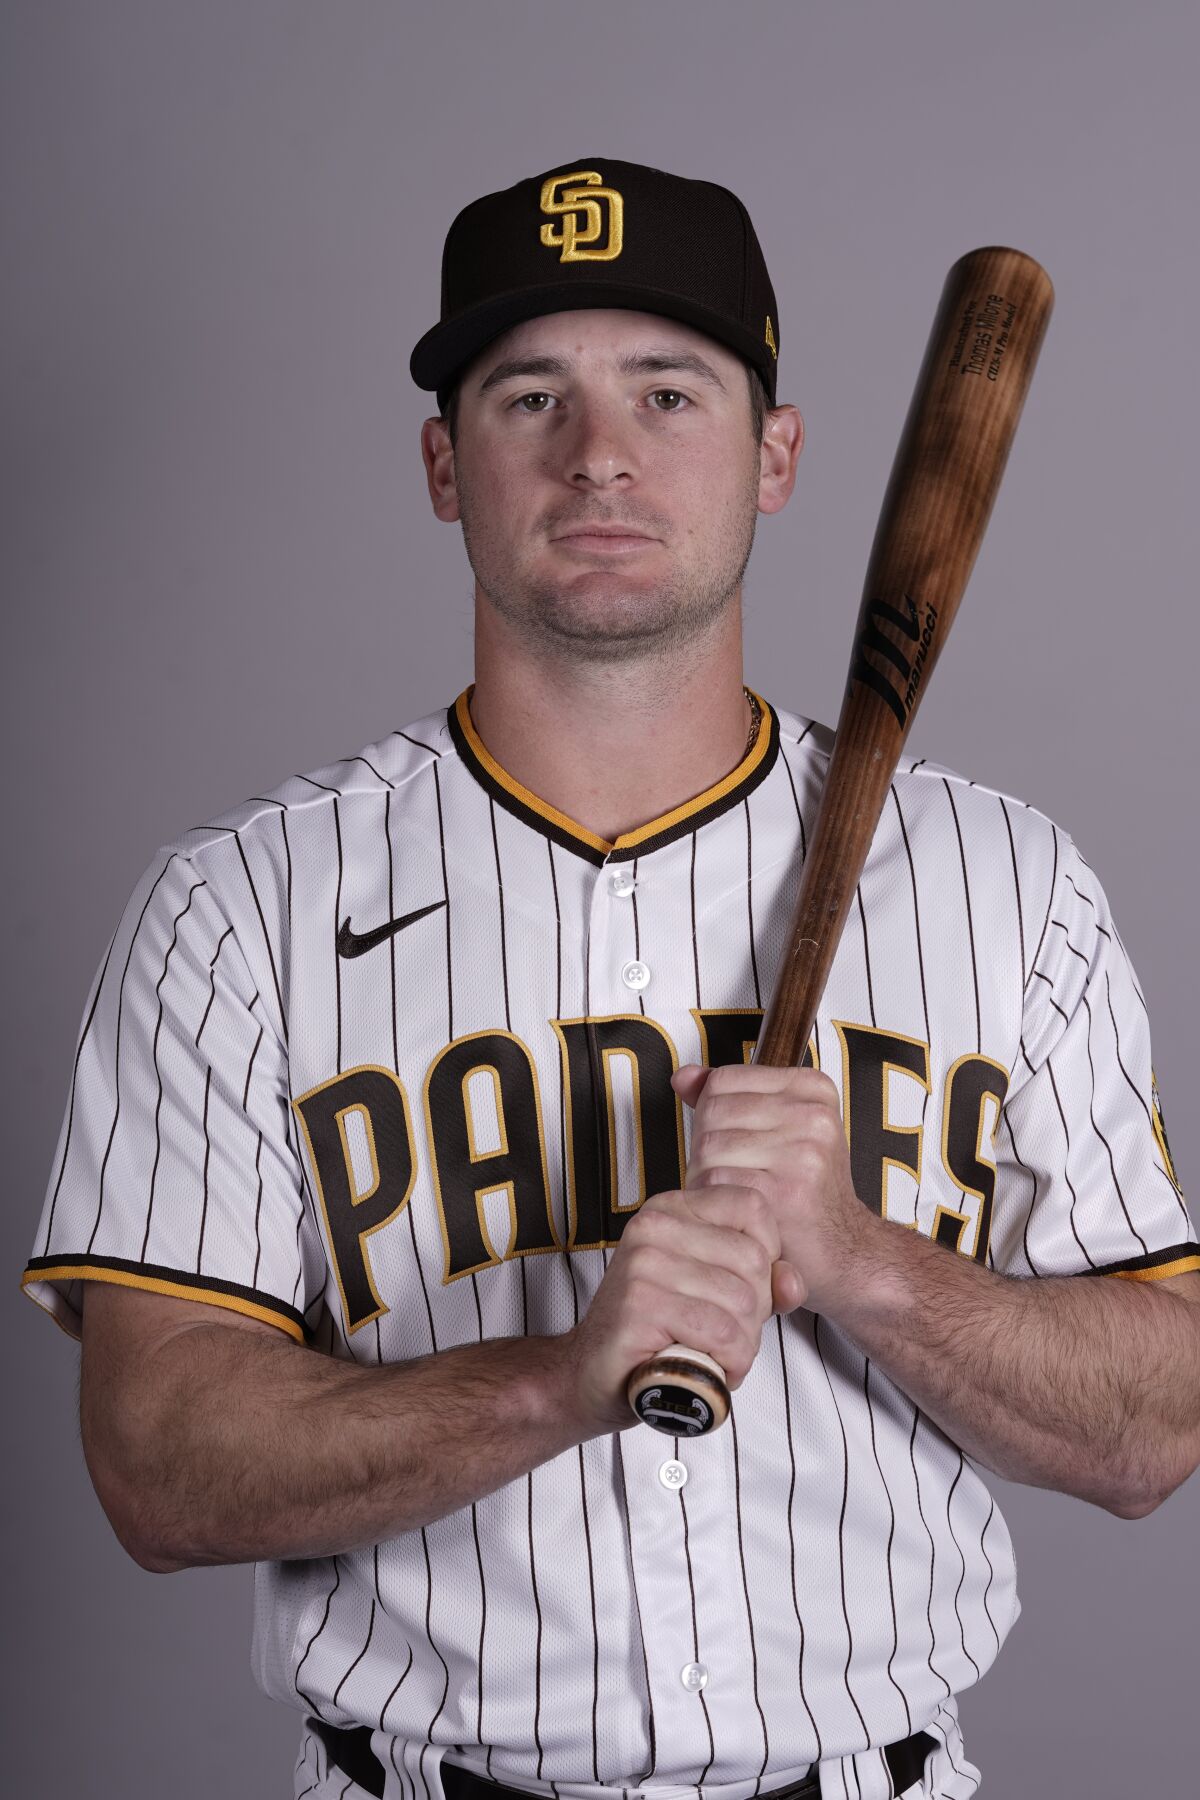 This is a 2022 photo of Thomas Milone of the San Diego Padres baseball team